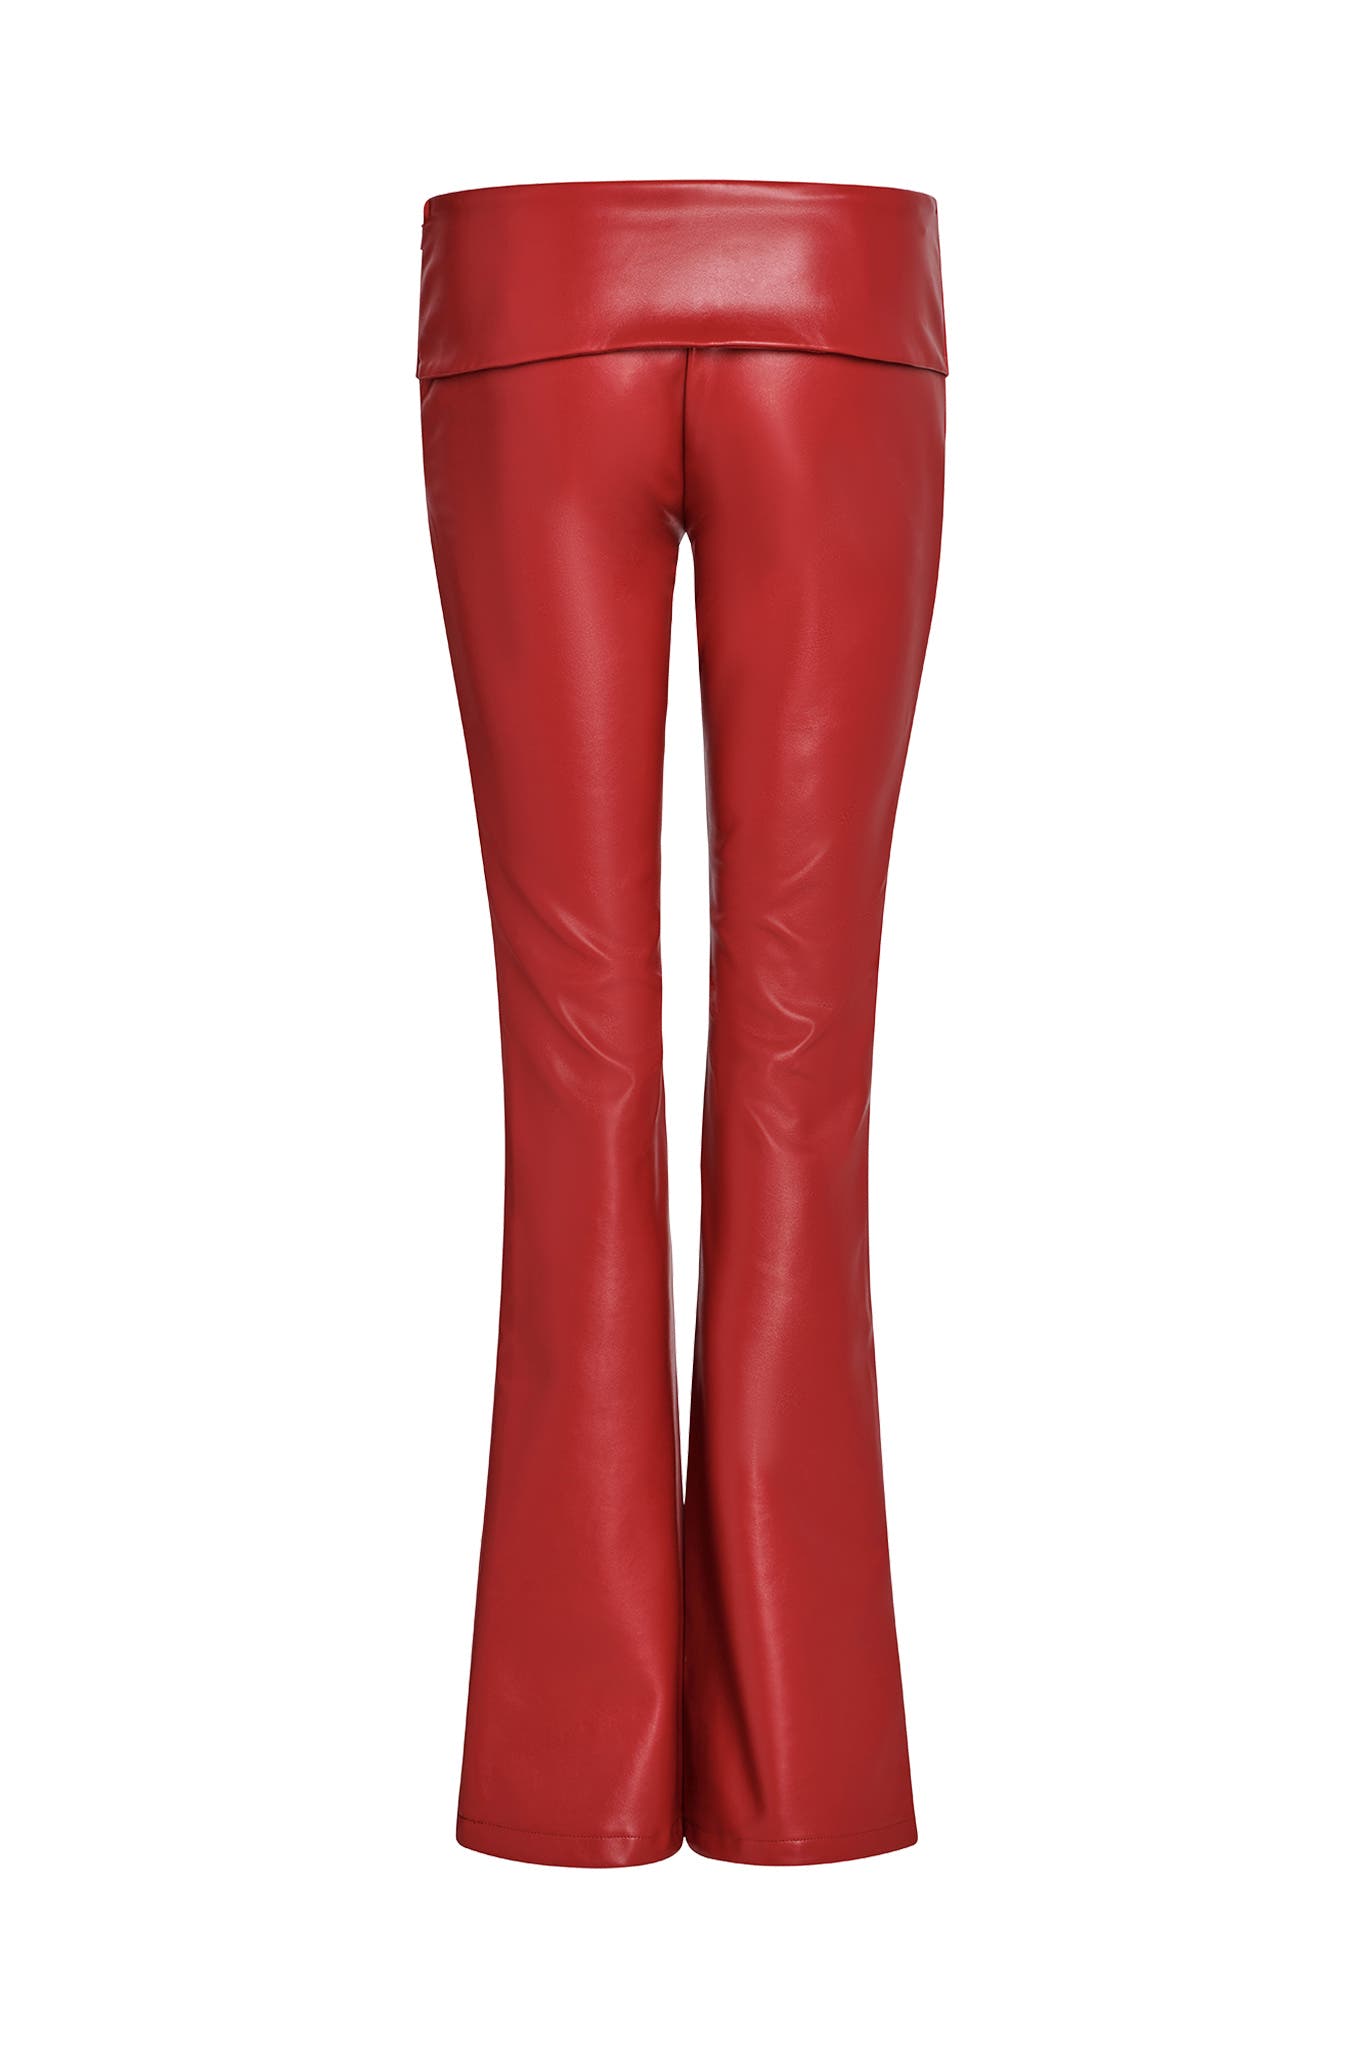 AMALTHEA PANT 2.0 - RED